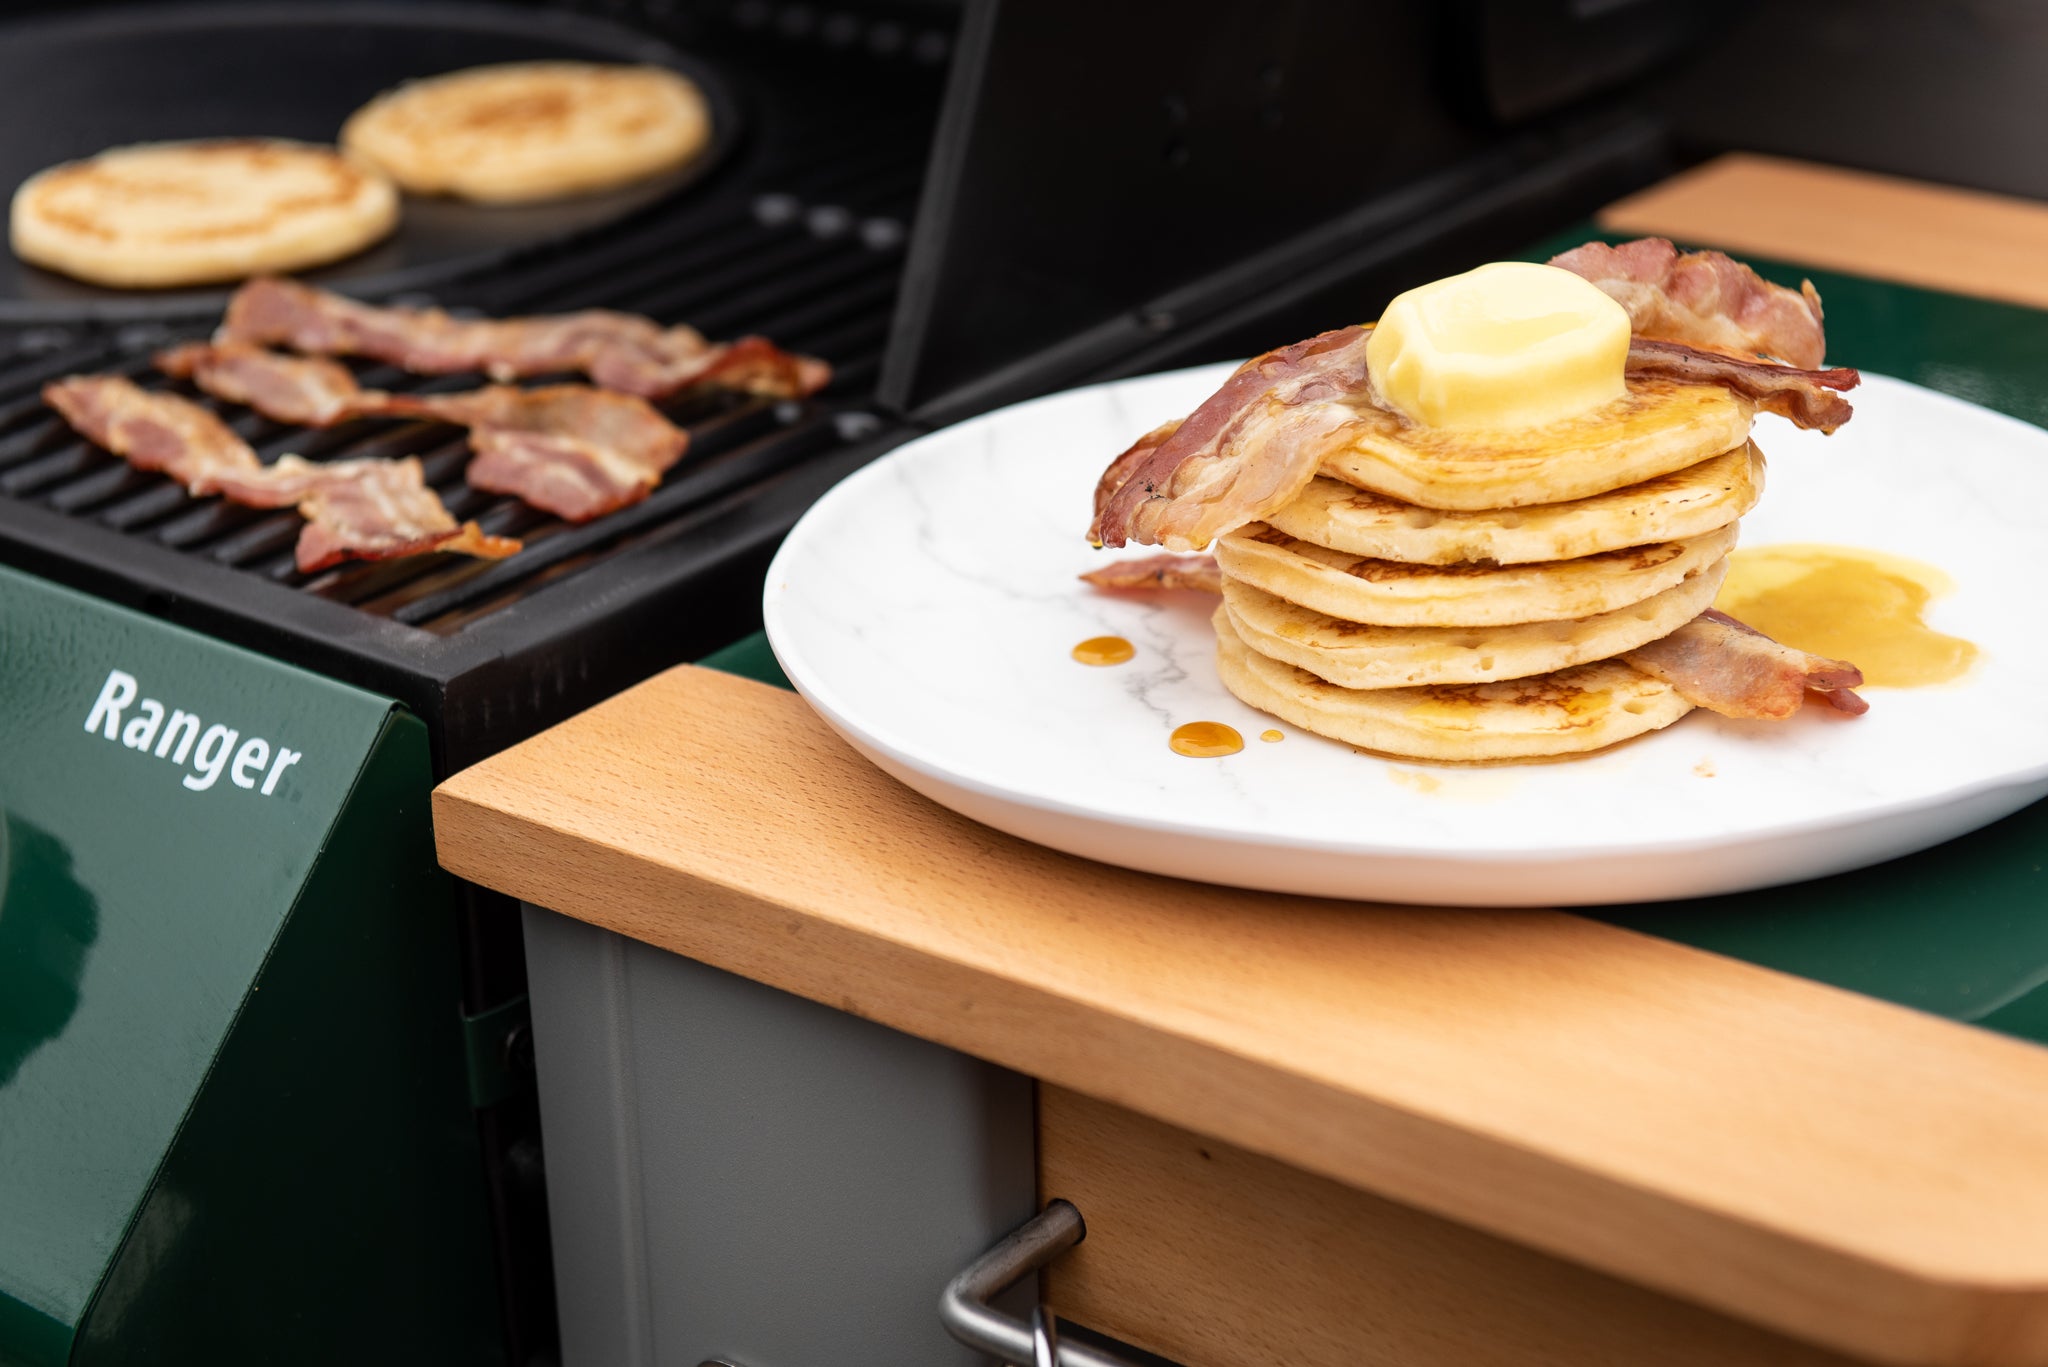 Outback Ranger 3 Burner BBQ with Bacon and Pancakes